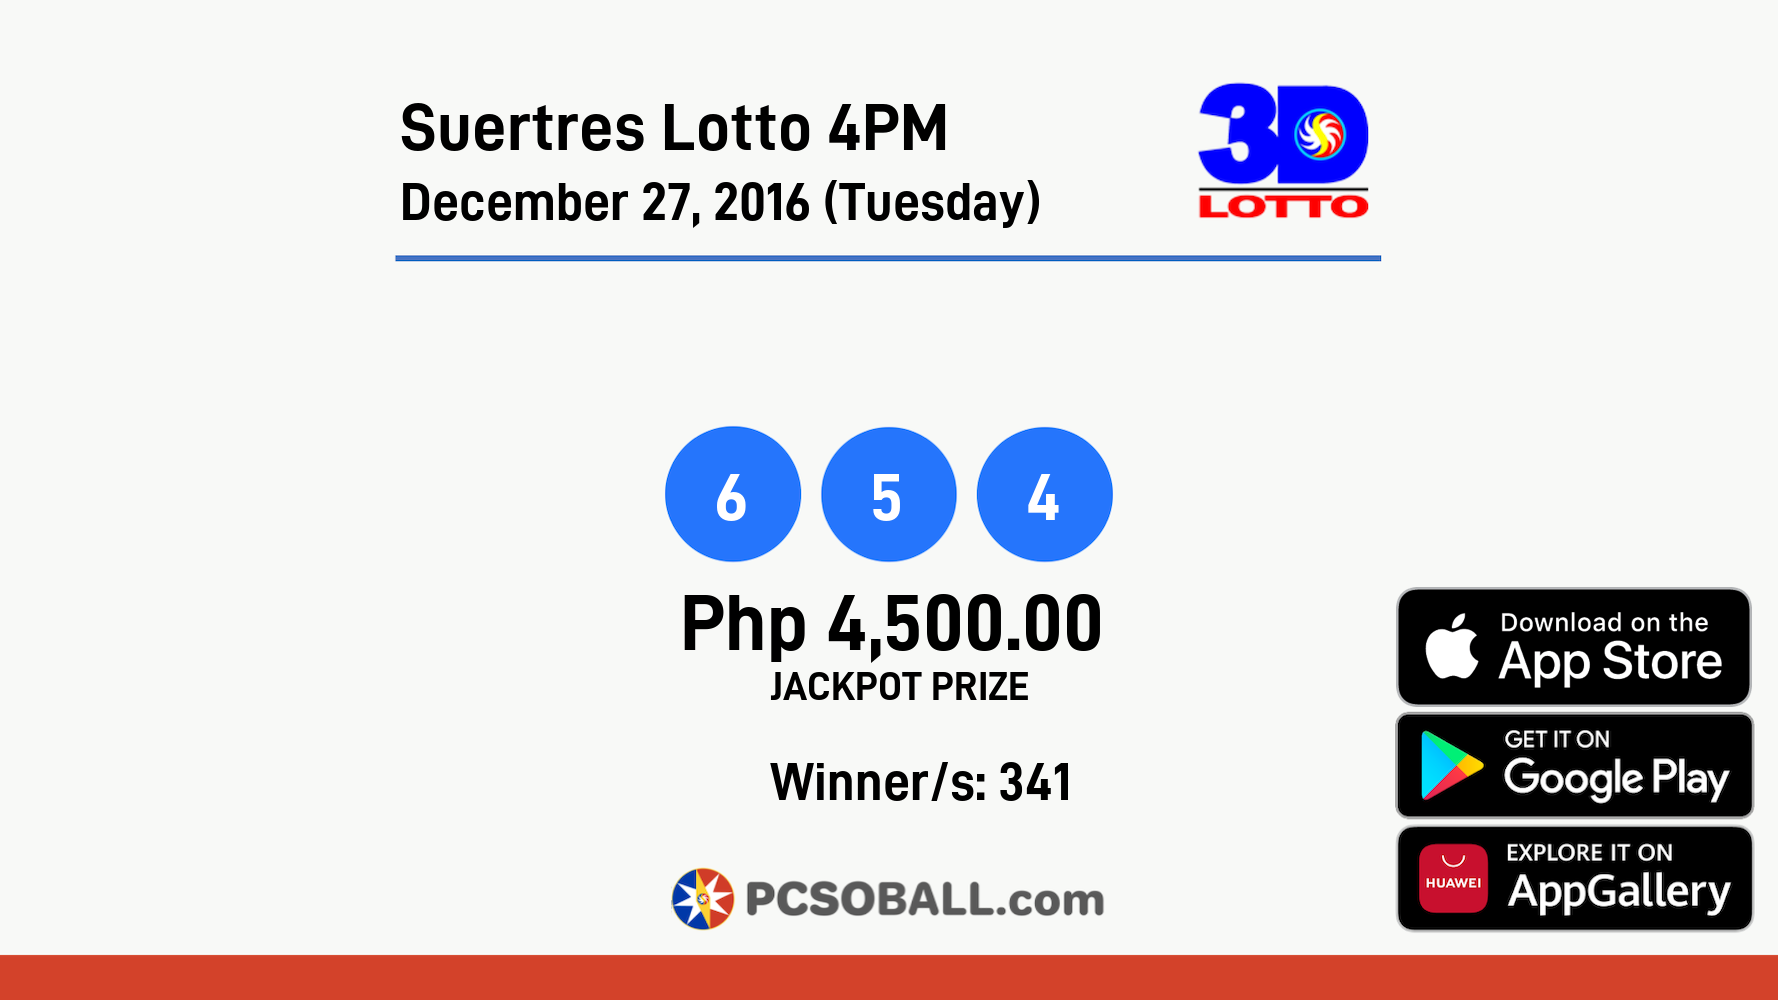 Suertres Lotto 4PM December 27, 2016 (Tuesday) Result